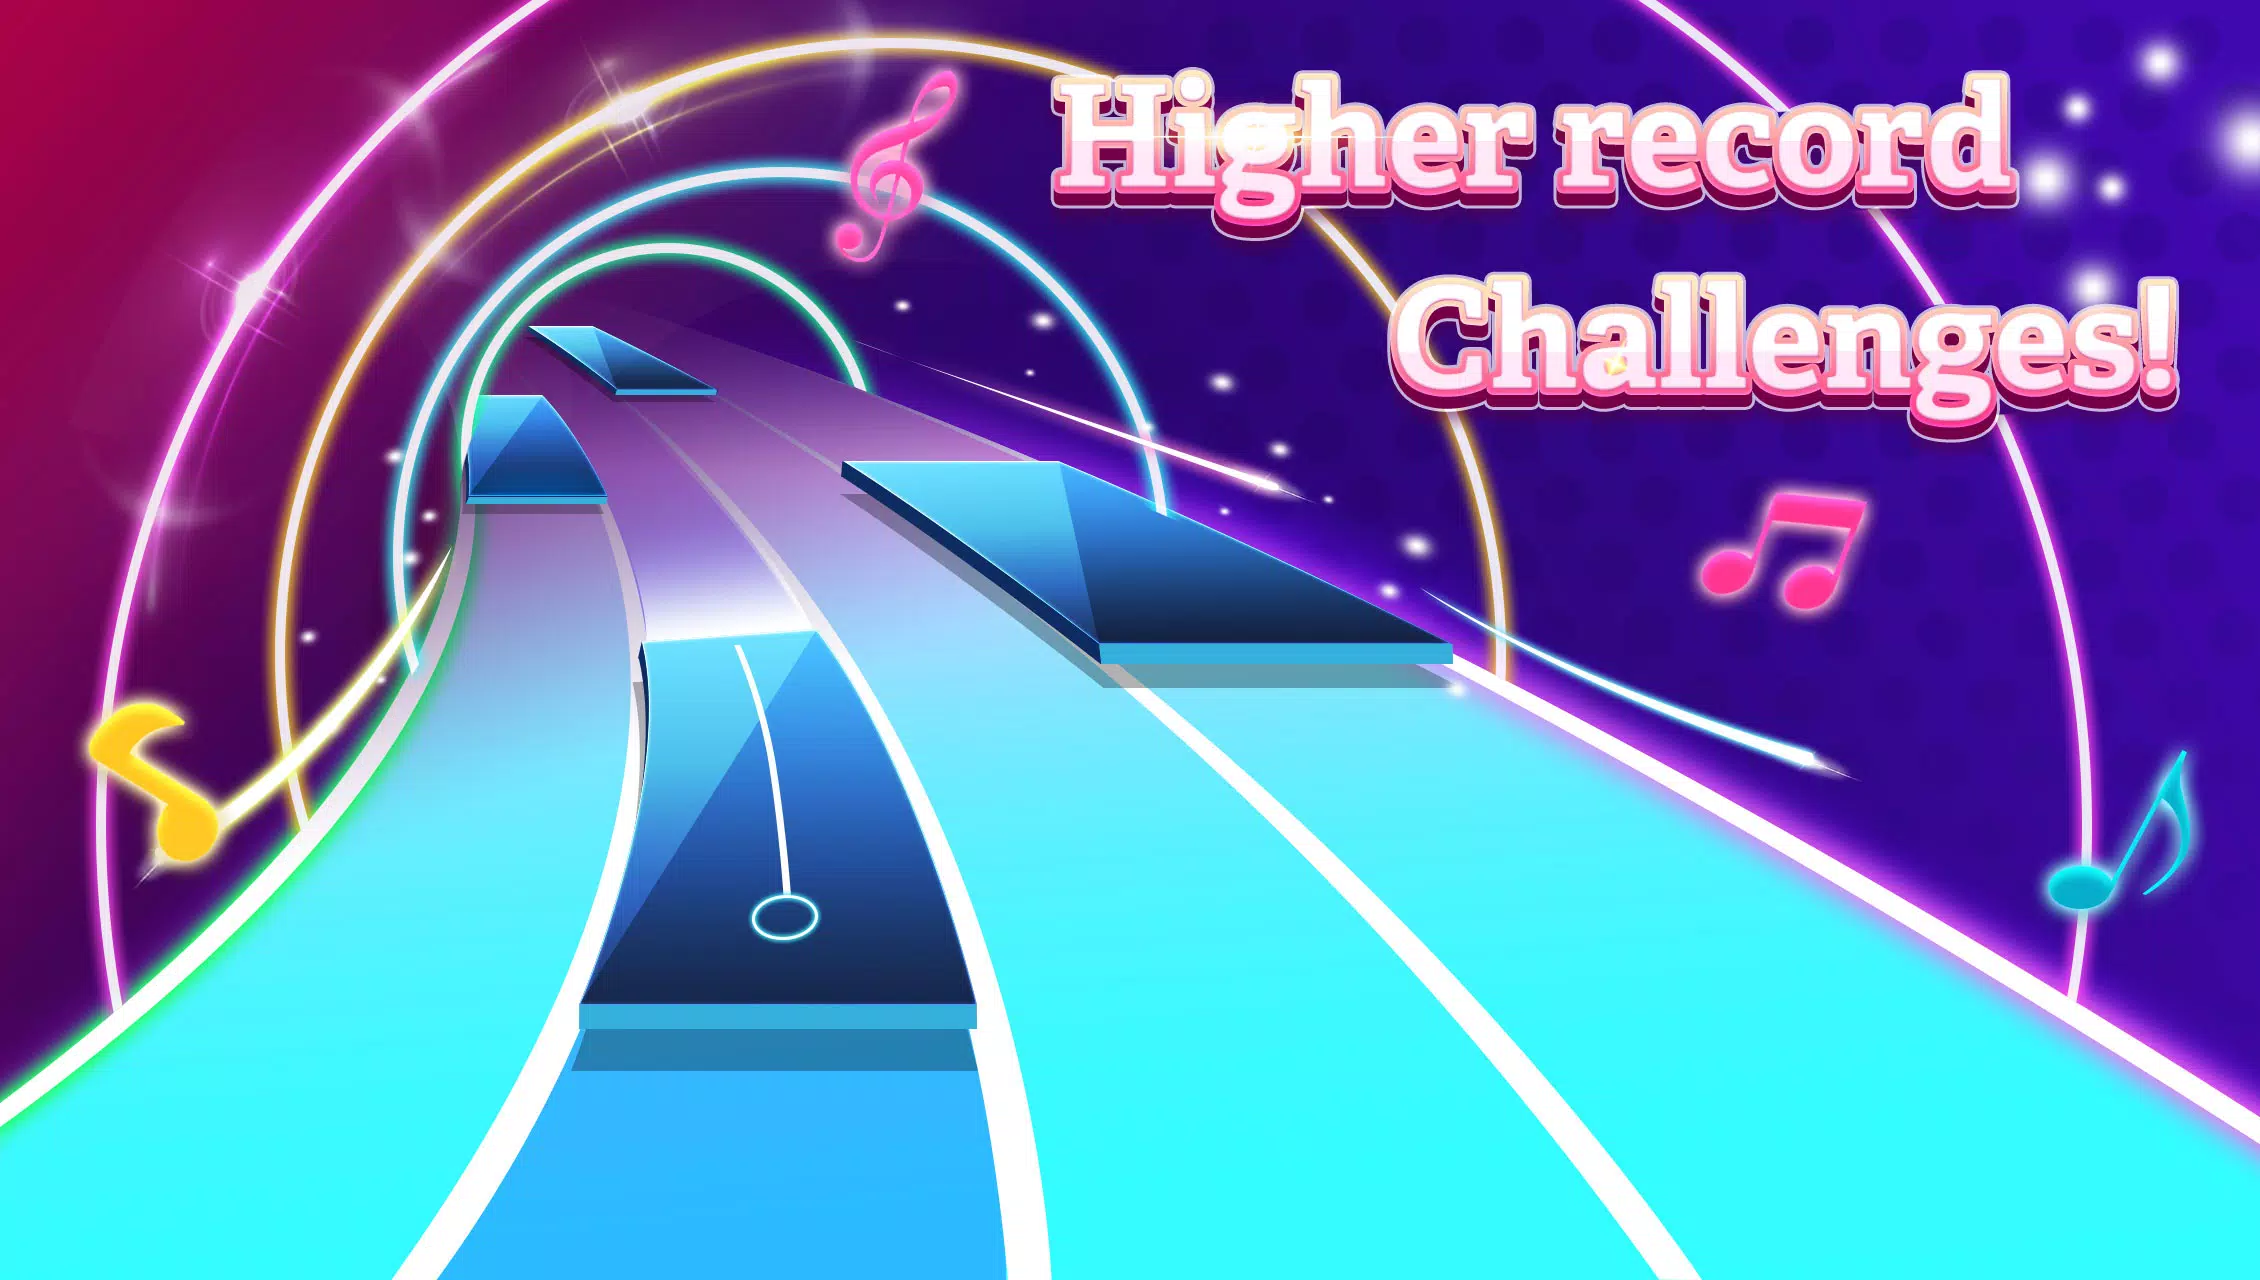 Piano Games - Free Music Piano Challenge 2020 APK 8.0.0 - Download